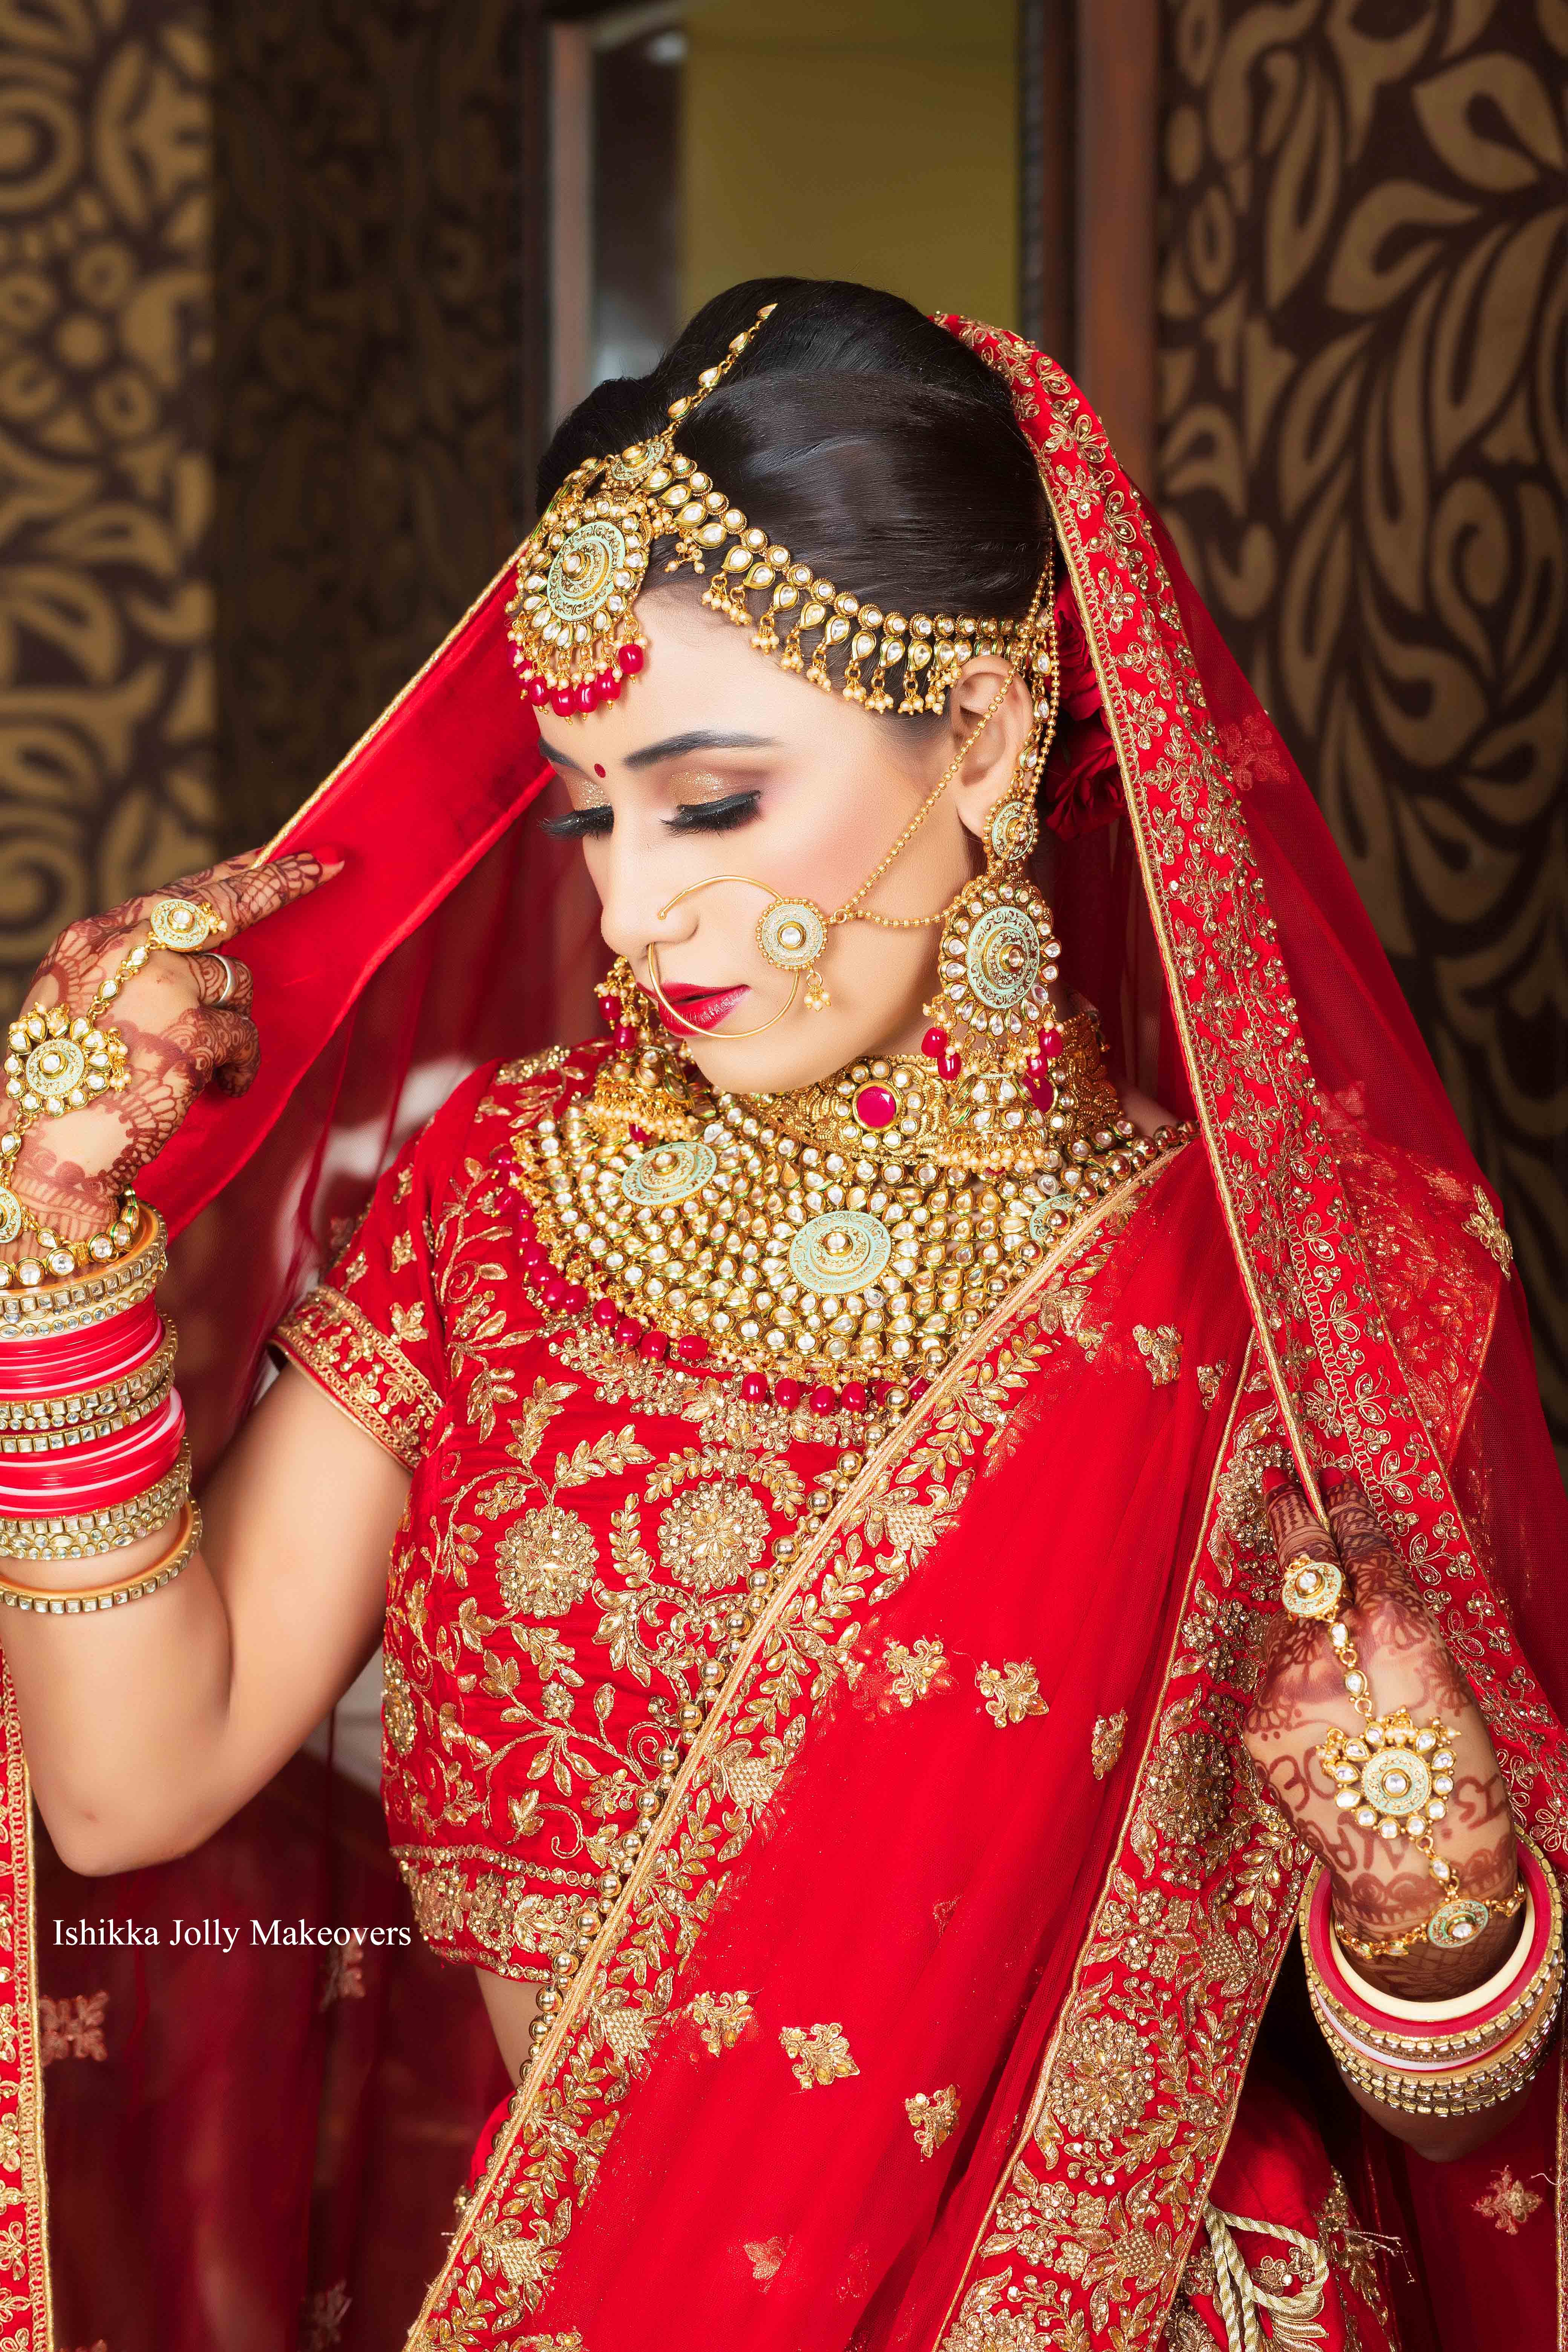 How to choose a Best Bridal Makeup Artist in Gurgaon